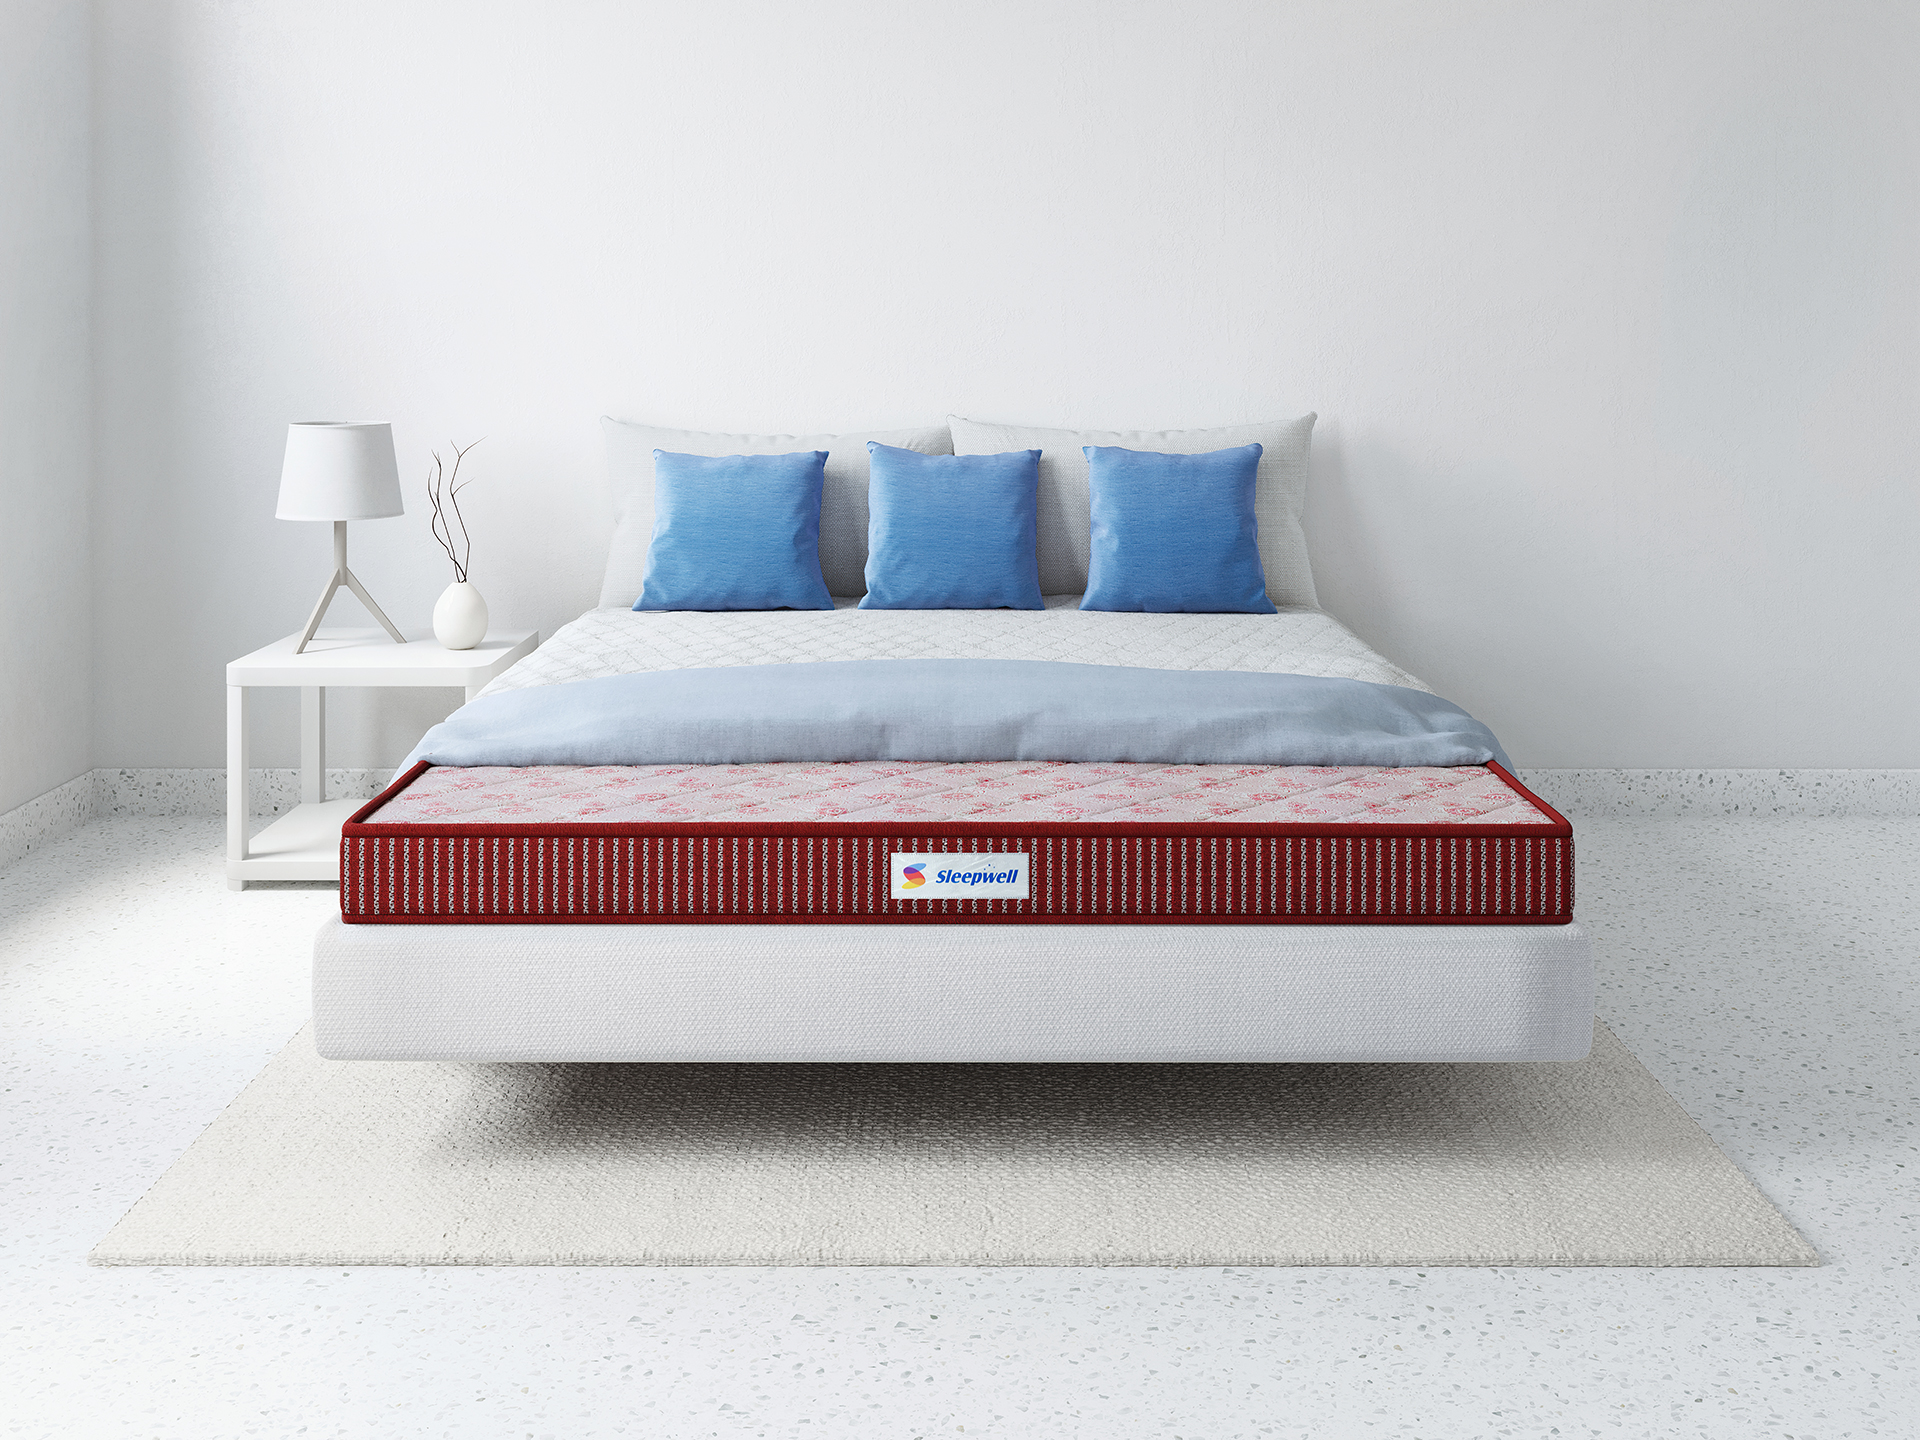 Top 5 Mattresses Under 10,000 INR in India for Affordable Comfort